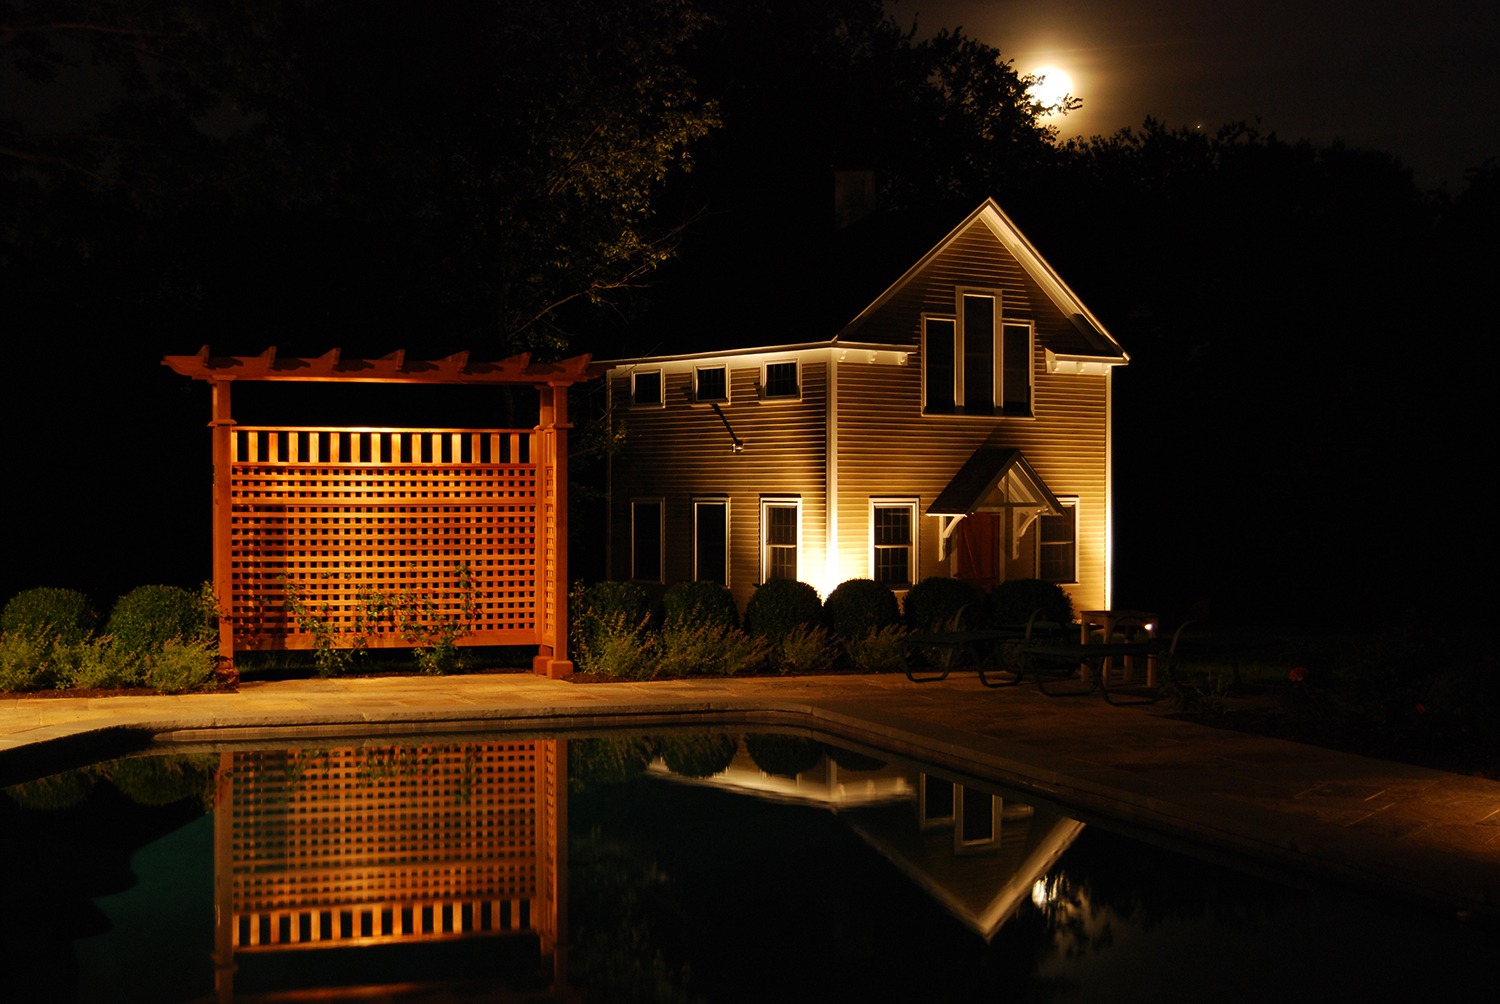 A night scene featuring a two-story house illuminated by warm light, a swimming pool in the foreground reflecting a pergola, and a rising moon.